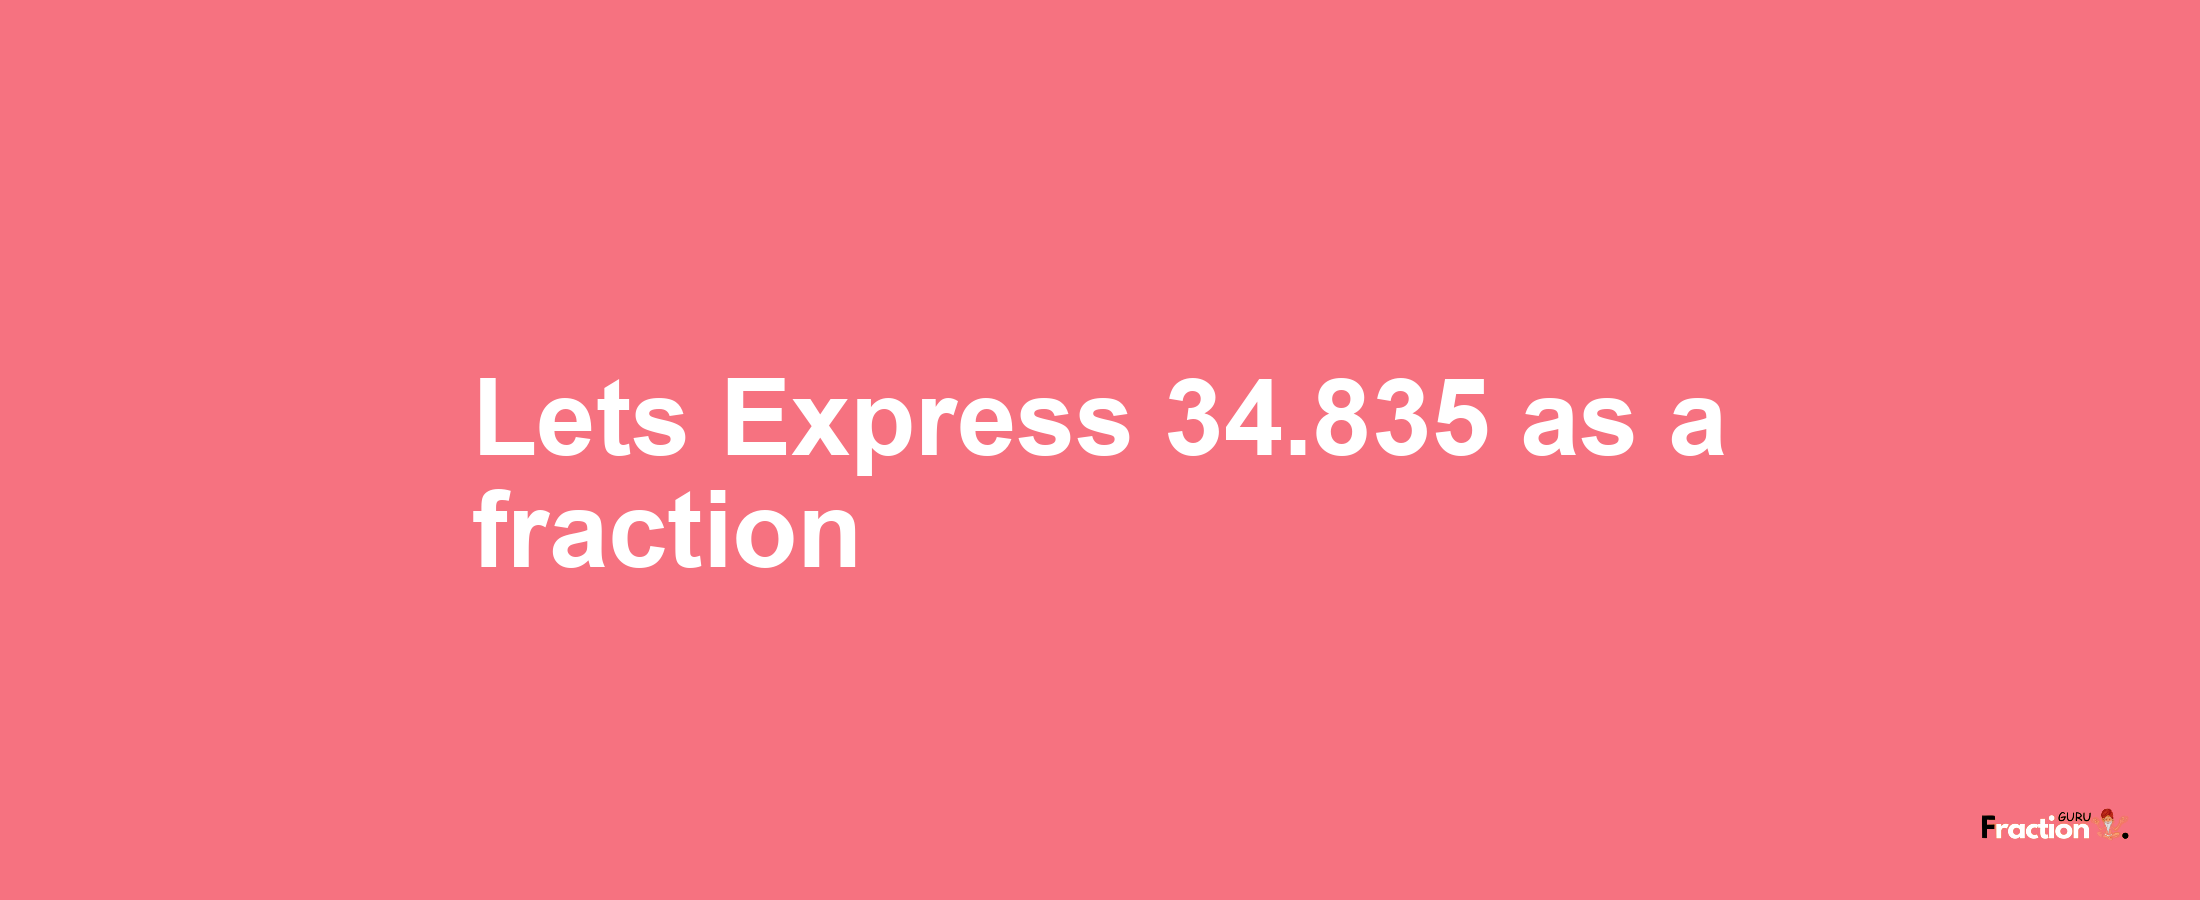 Lets Express 34.835 as afraction